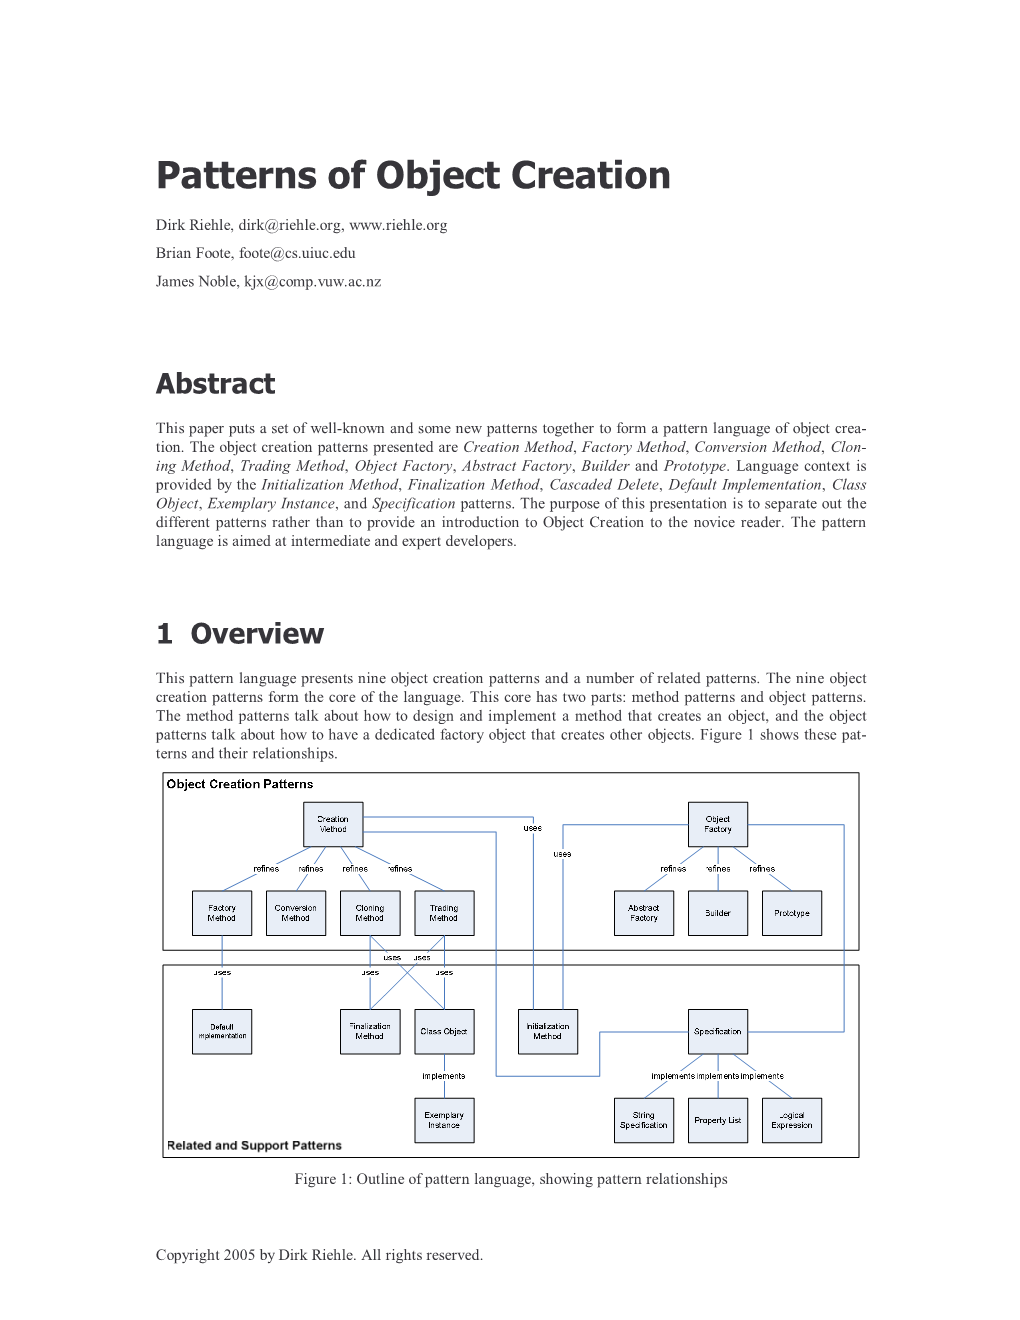 Patterns of Object Creation